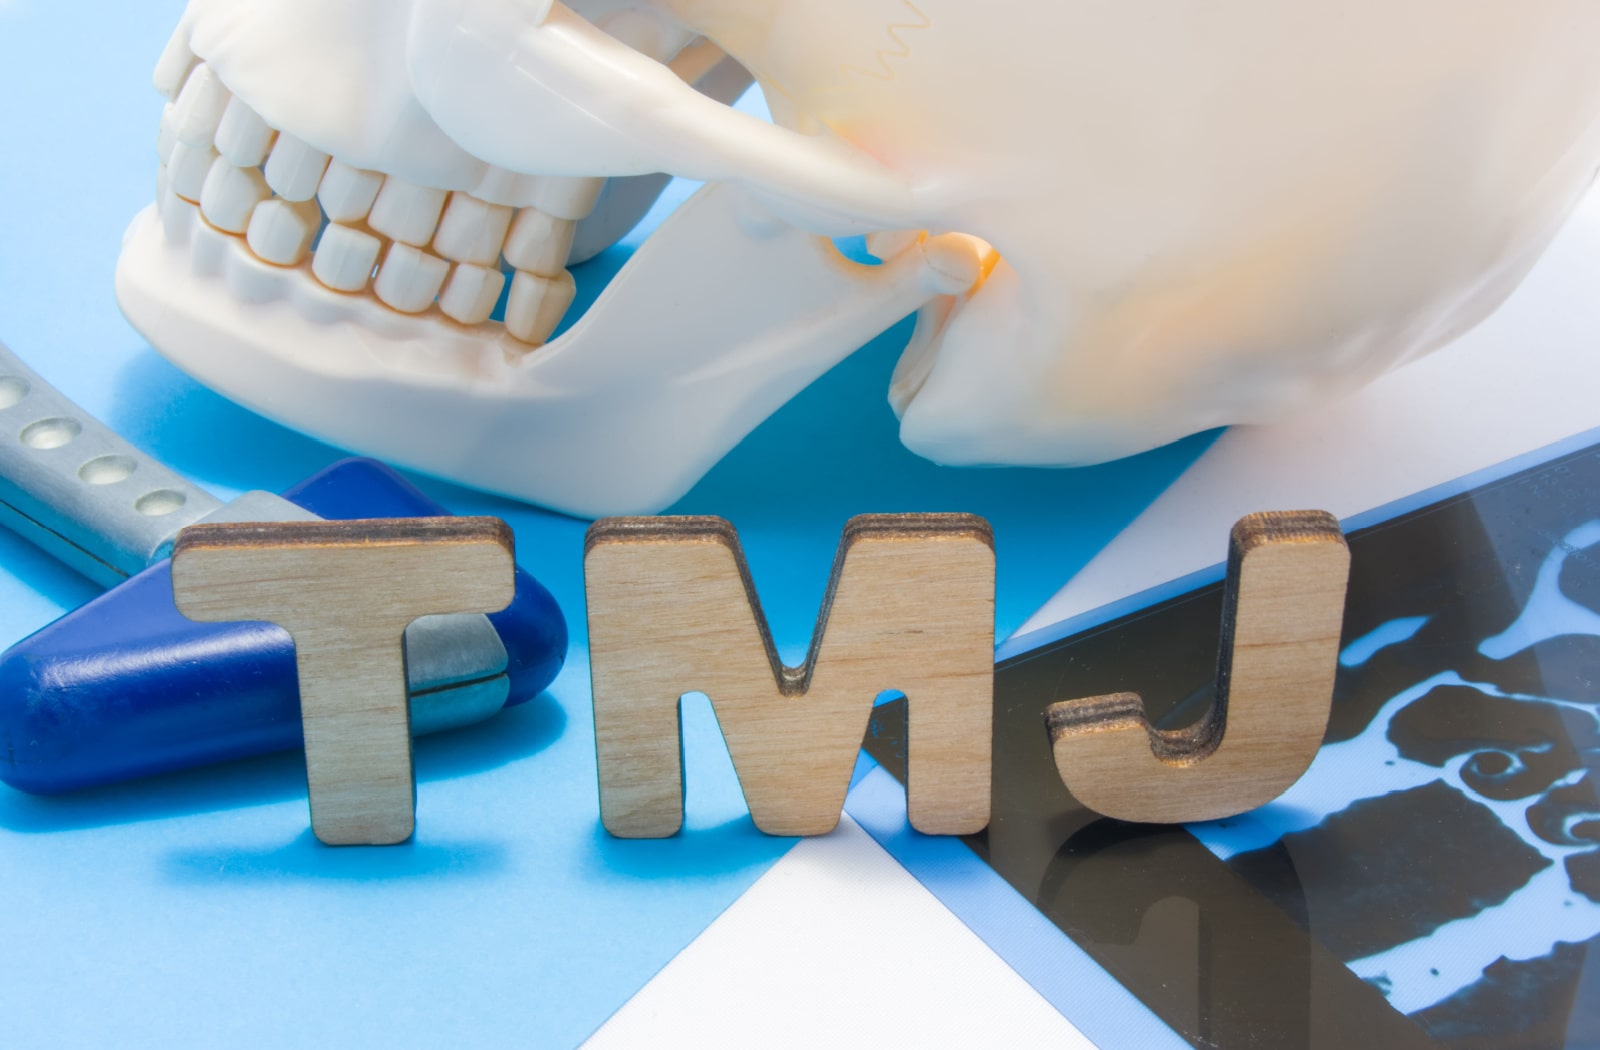 Three wooden blocks sitting up next to each other, and they spell out "TMJ" which stands for temporomandibular joint disorder